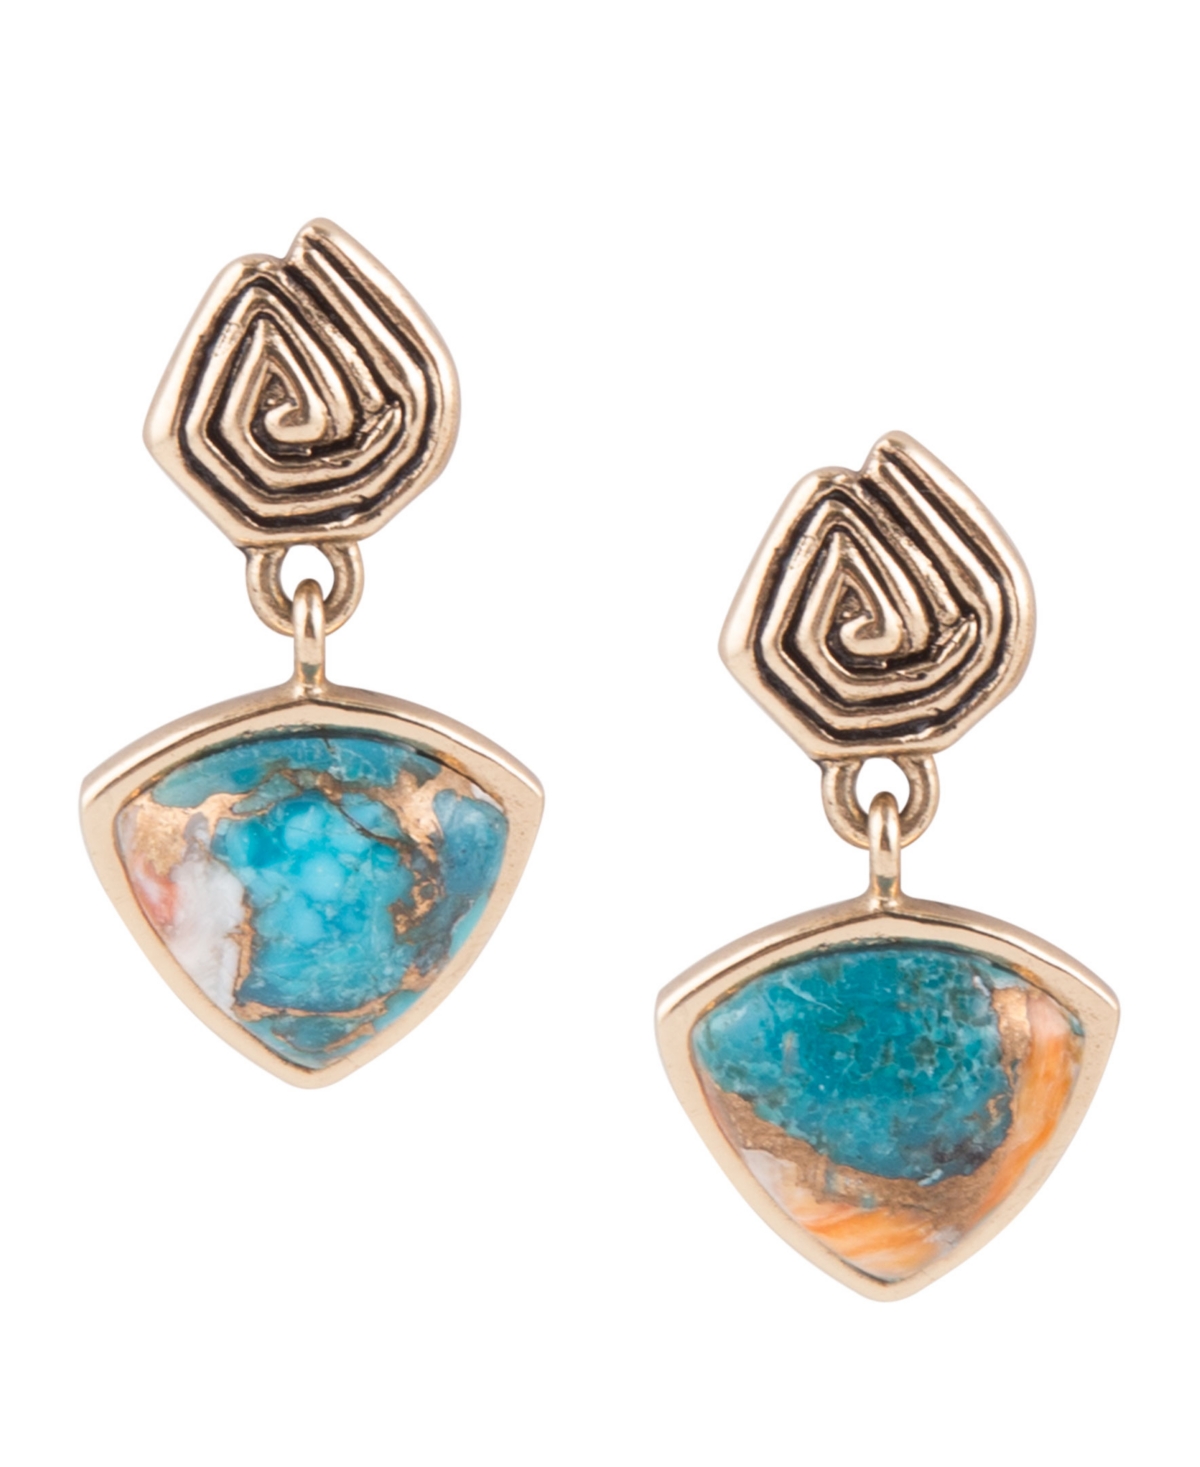 Barse Out West Bronze And Genuine Turquoise Spiny Oyster Matrix Earrings In Turquoise And Spiny Oyster Matrix Stone